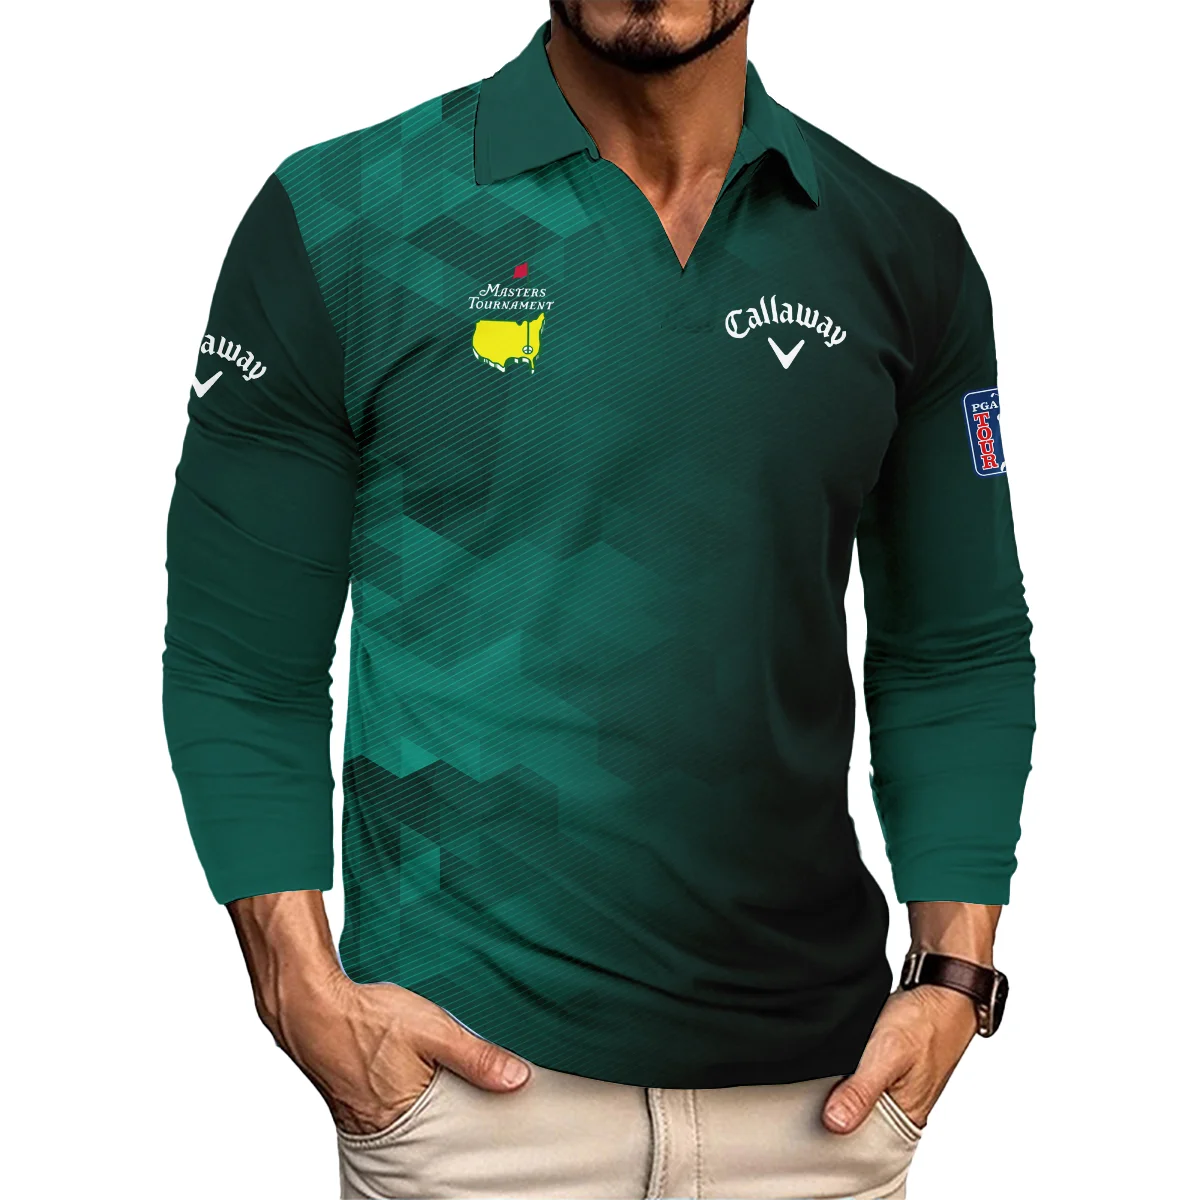 Callaway Golf Sport Dark Green Gradient Abstract Background Masters Tournament Vneck Long Polo Shirt Style Classic Long Polo Shirt For Men